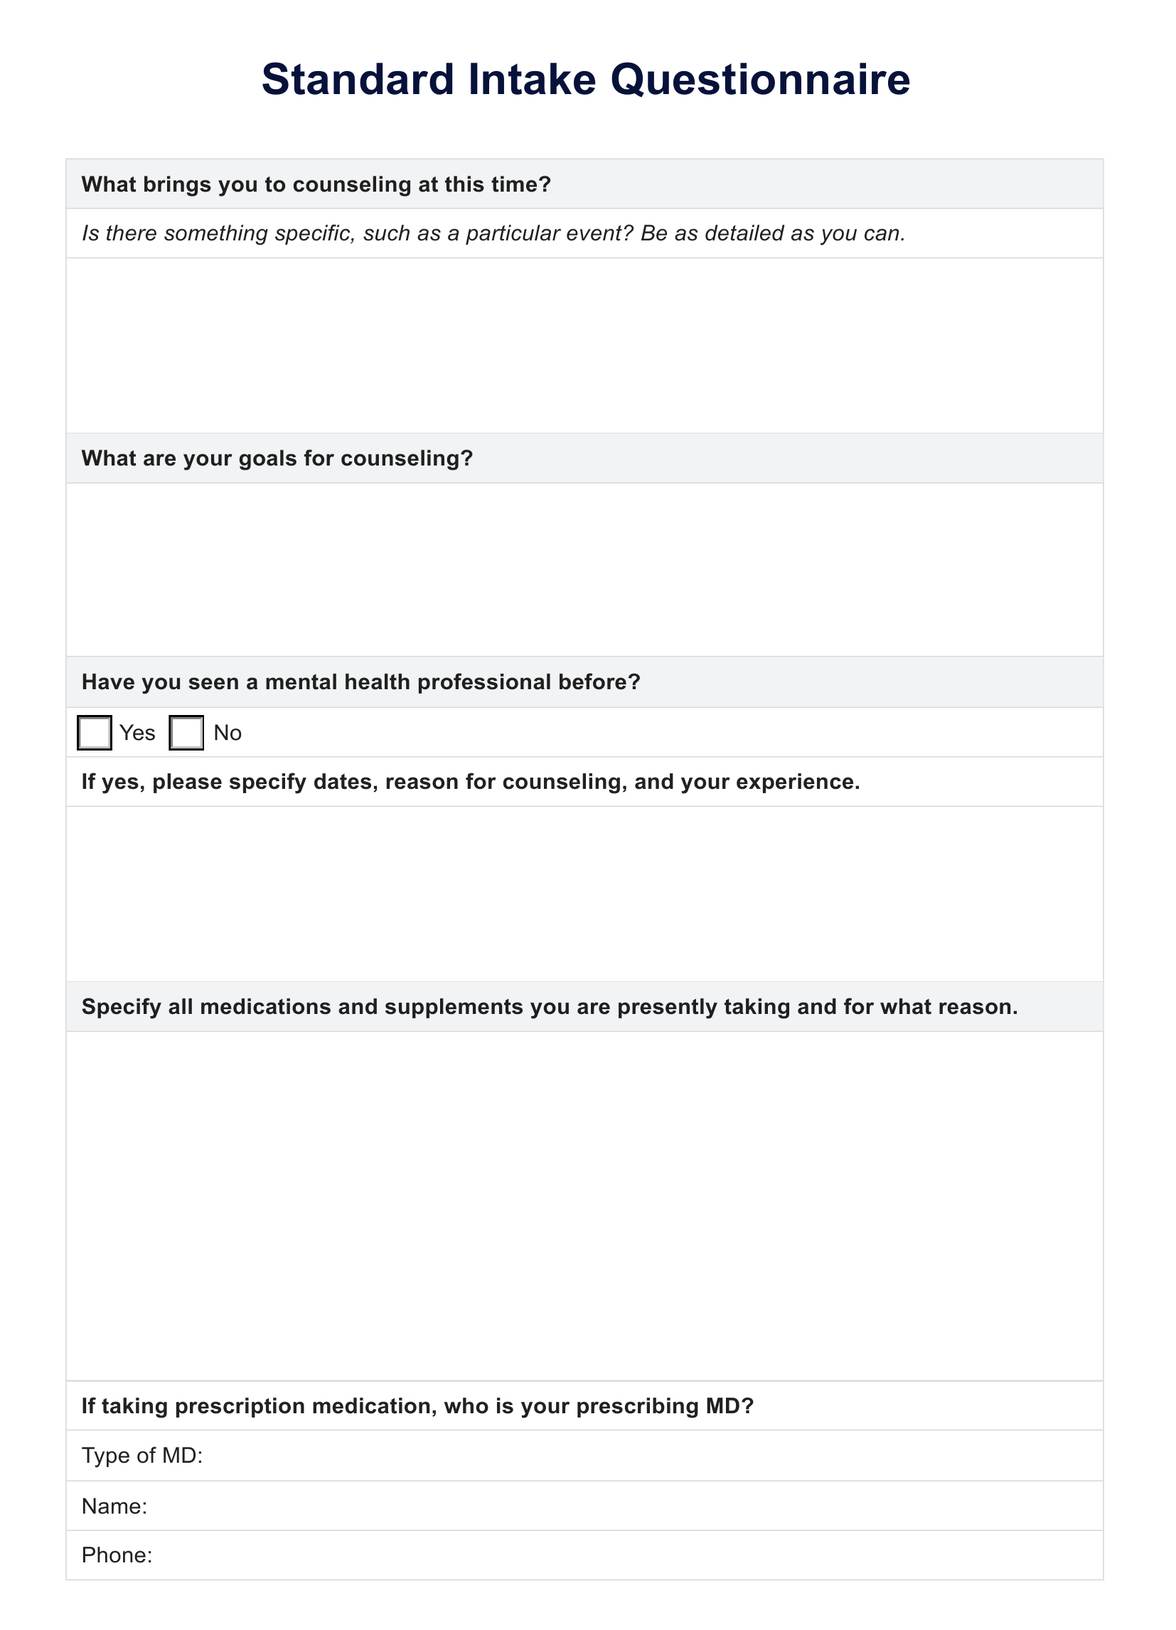 Standard Intake Questionnaire Template PDF Example